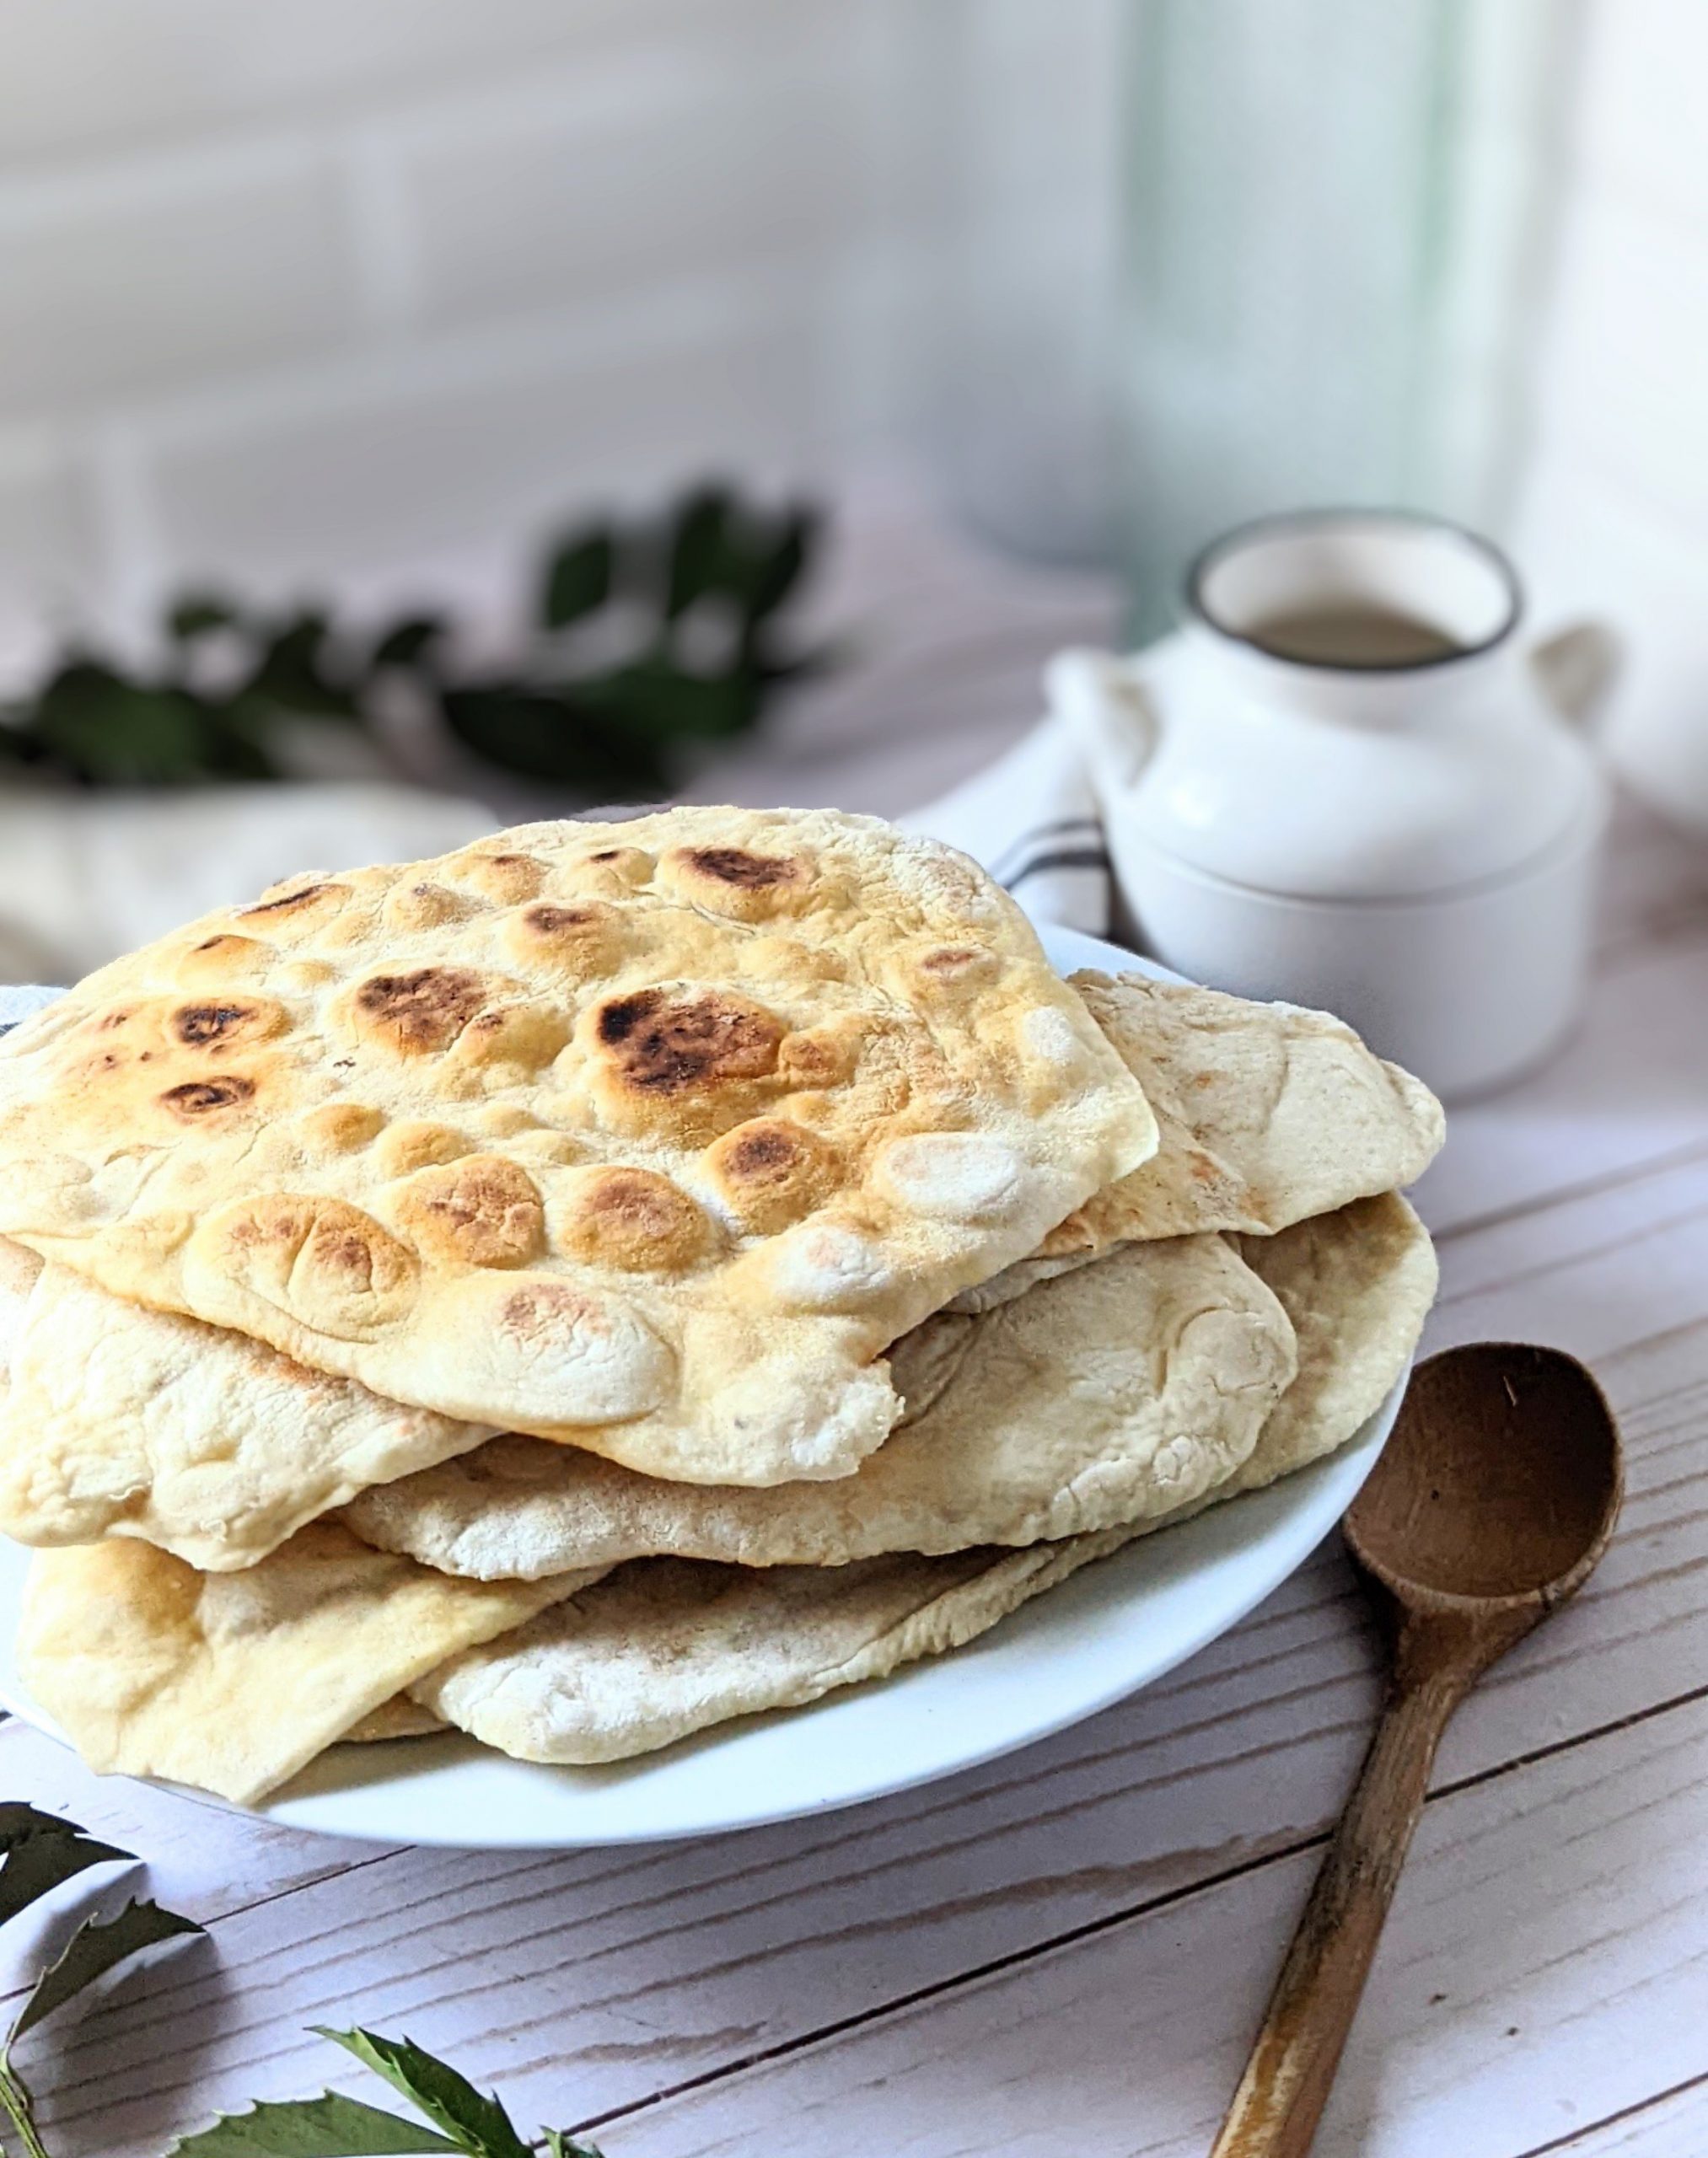 naan with yeast recipe instant yeast naan bread recipe flatbread with yeast at home